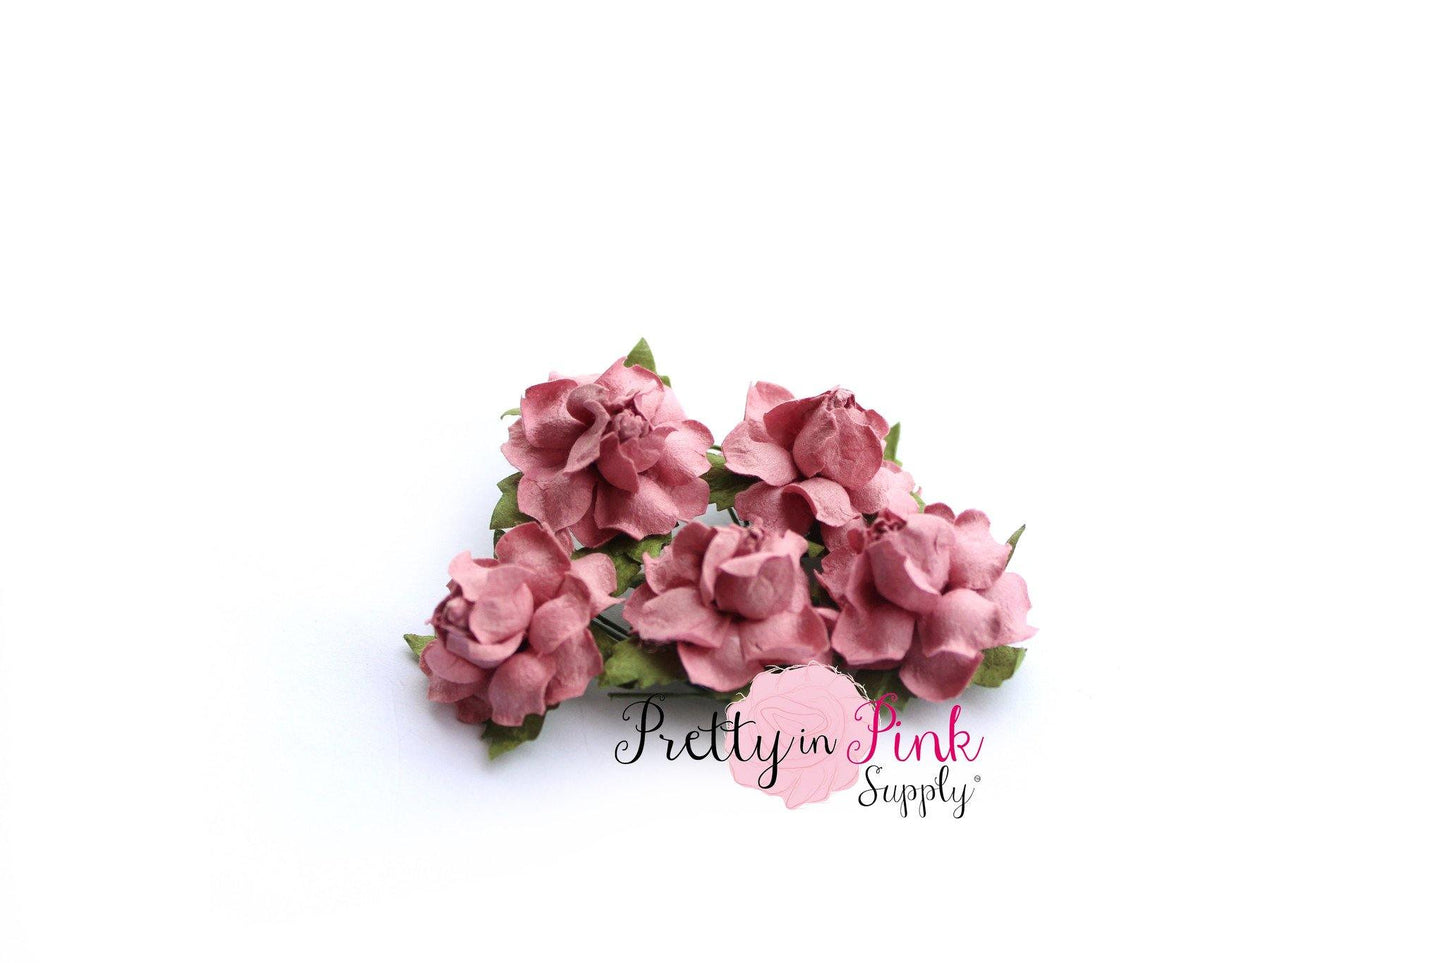 1" PREMIUM Dusty Rose Paper Flowers - Pretty in Pink Supply